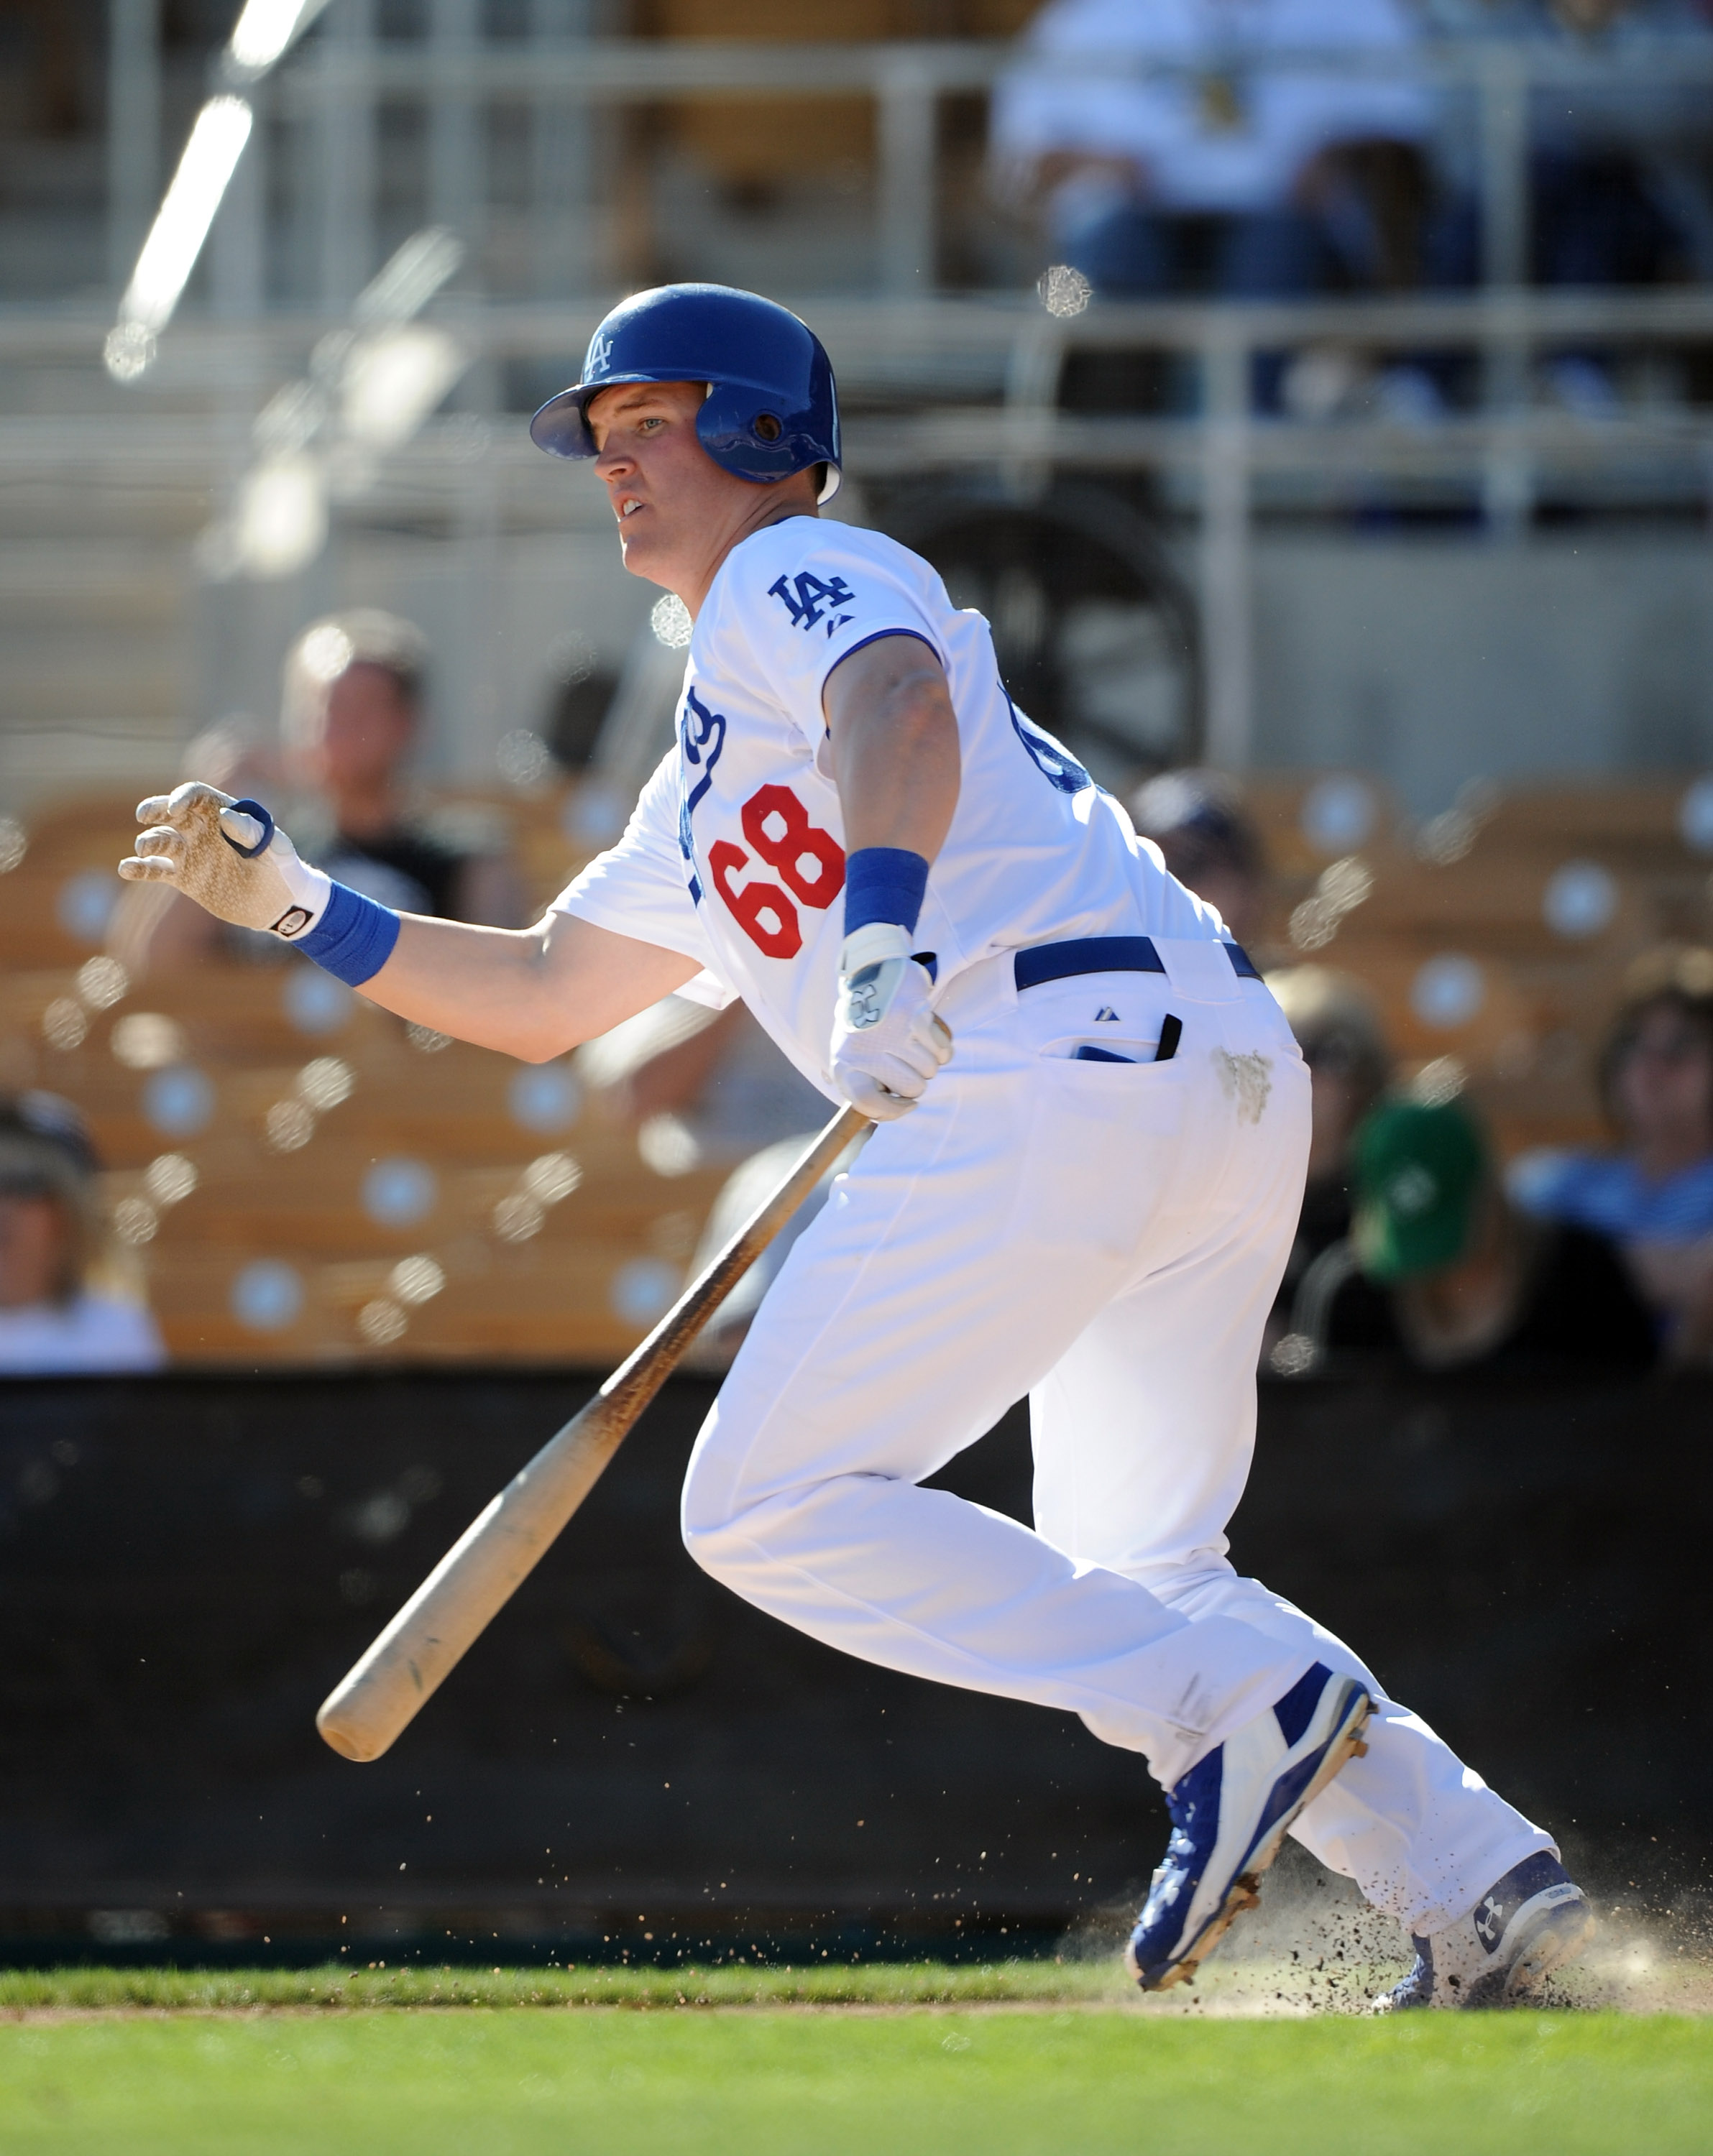 PHOENIX, AZ - FEBRUARY 28:  Jerry Sands #68 of the Los Angeles Dodgers at bat during spring training at Camelback Ranch on February 28, 2011 in Phoenix, Arizona.  (Photo by Harry How/Getty Images)